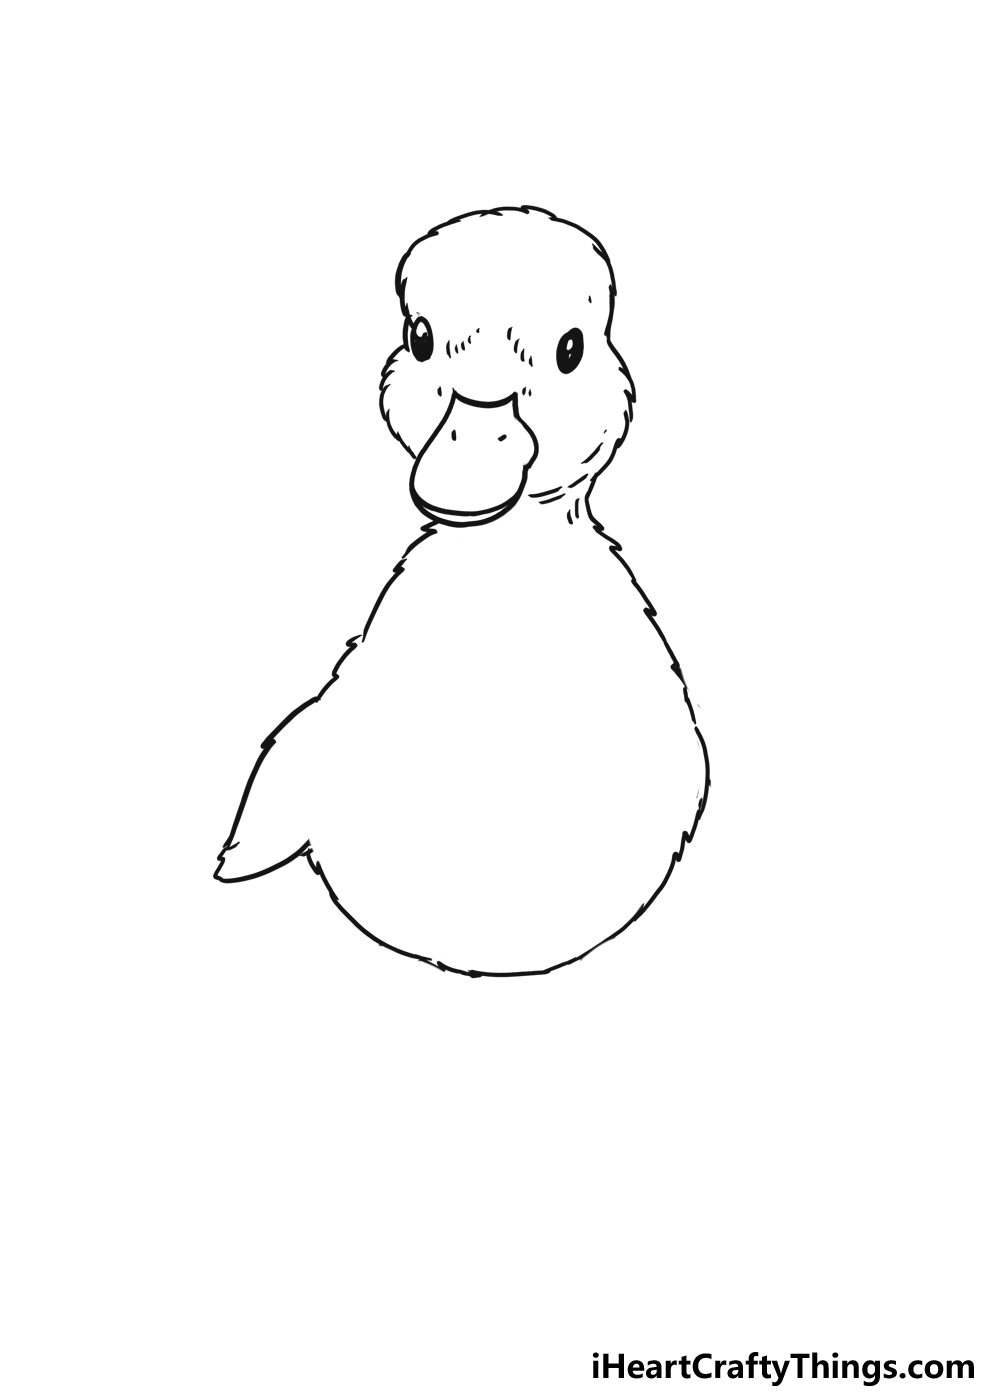 How to Draw A Cute Duckling step 3